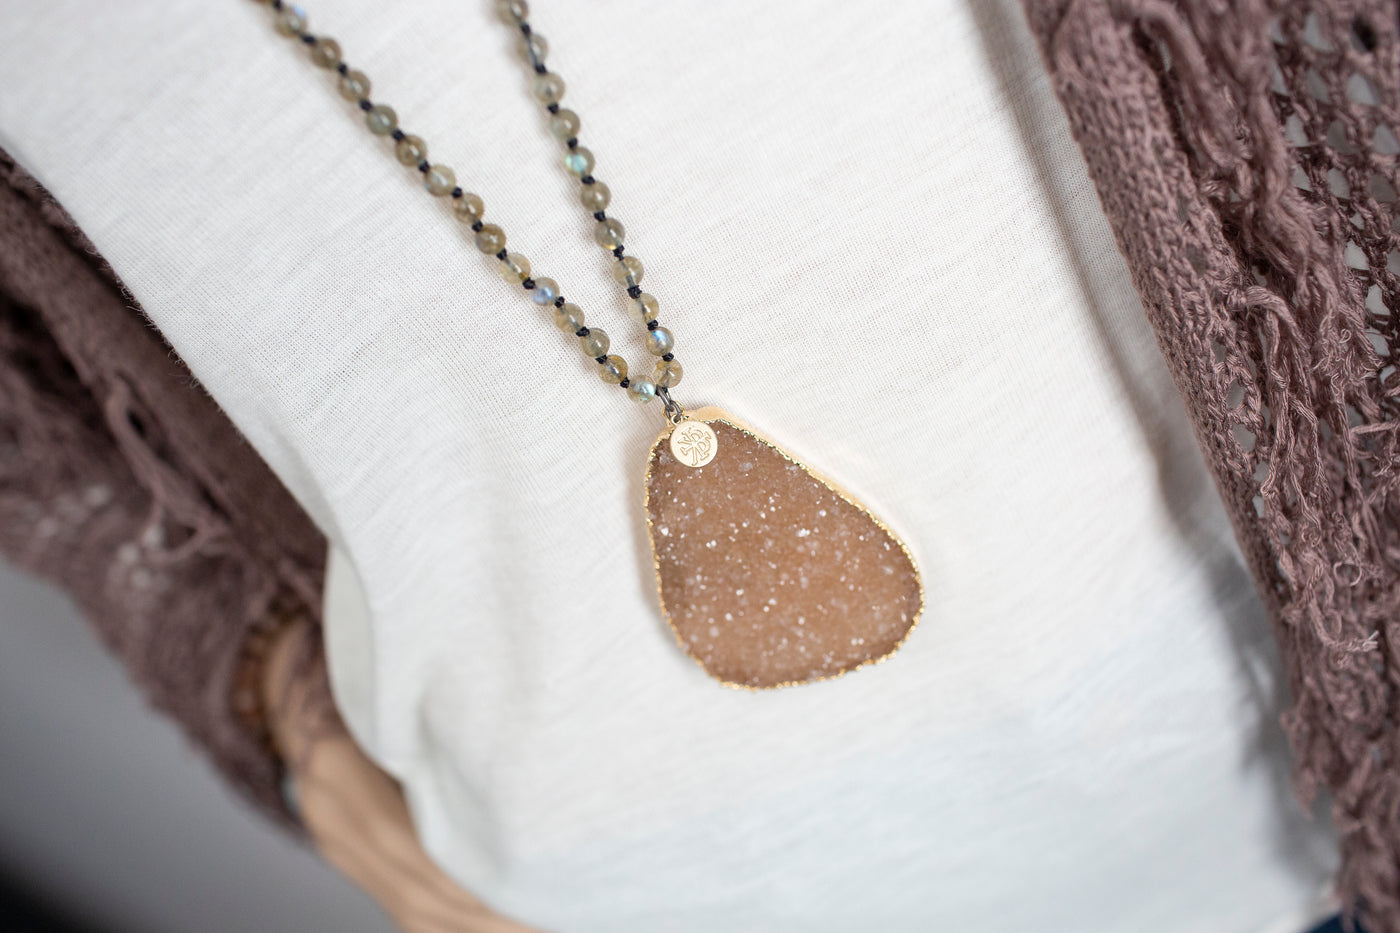 Druzy Quartz Pendant Necklace by Karli Buxton - Corinne an Affordable Women's Clothing Boutique in the US USA